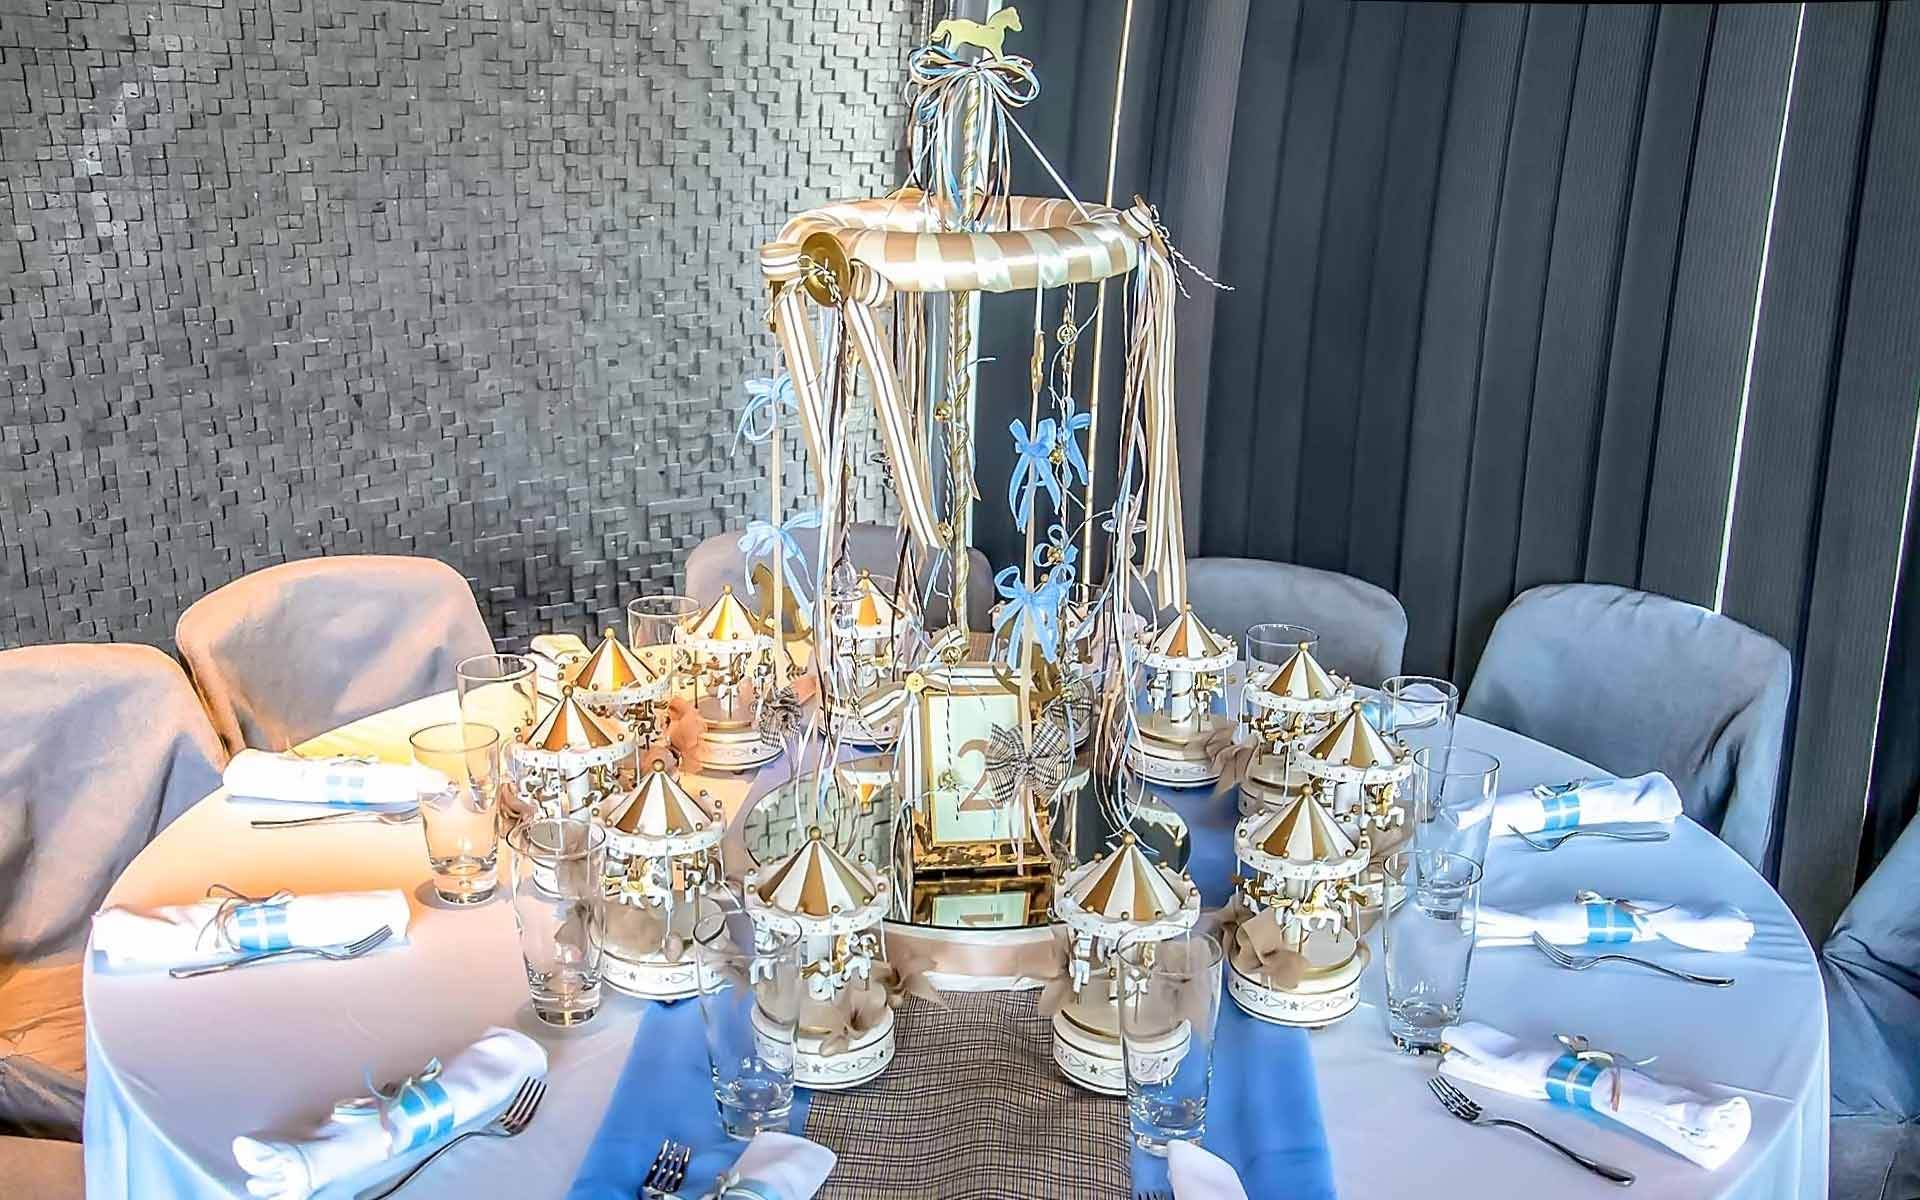 A-Carousel-Sets-The-Scene-For-This-Exquisite-Centerpiece